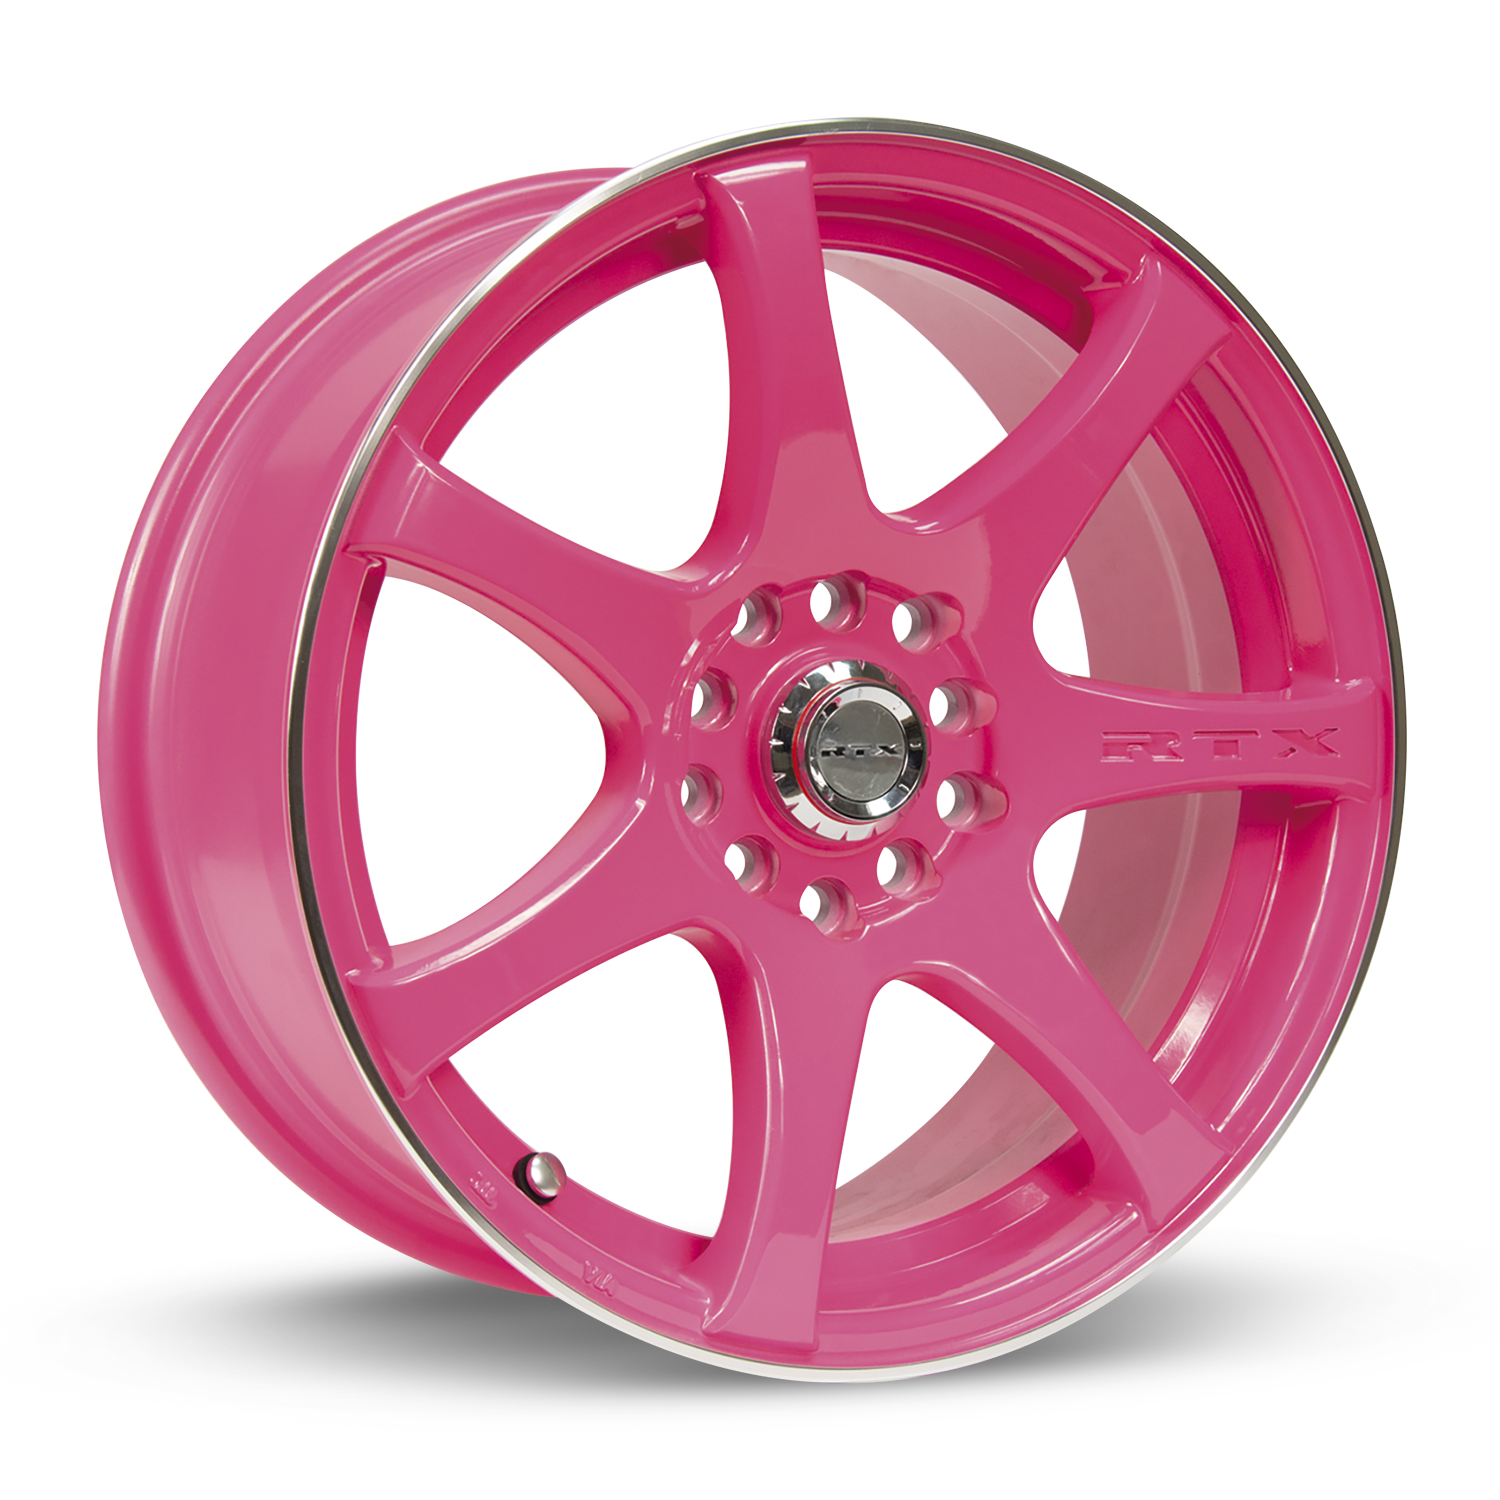 RTX INK DIVA PINK AND MACHINED WHEELS | 15X6.5 | 4X100/114.3 | OFFSET: 40MM | CB: 73.1MM